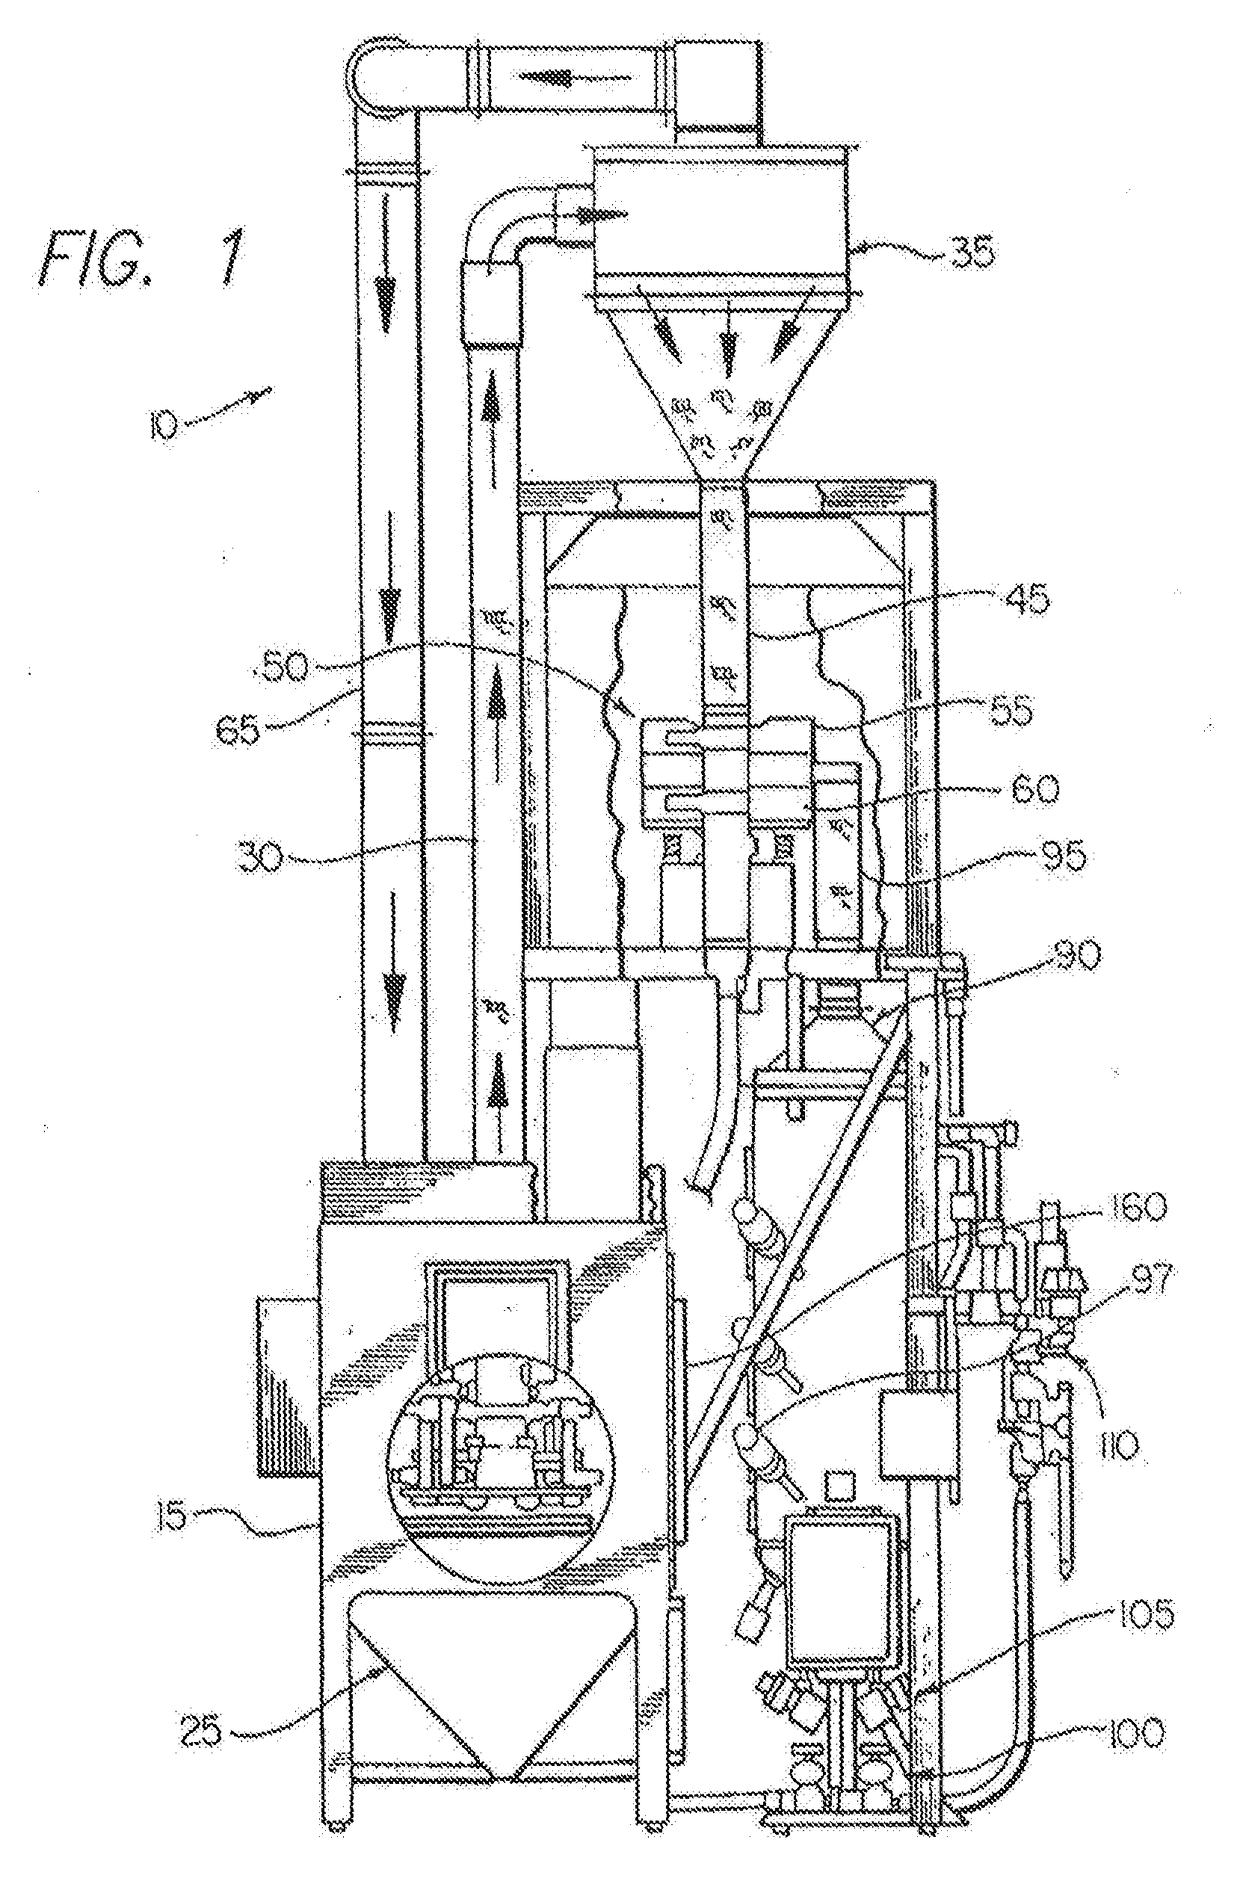 Part processing and cleaning apparatus and method of same